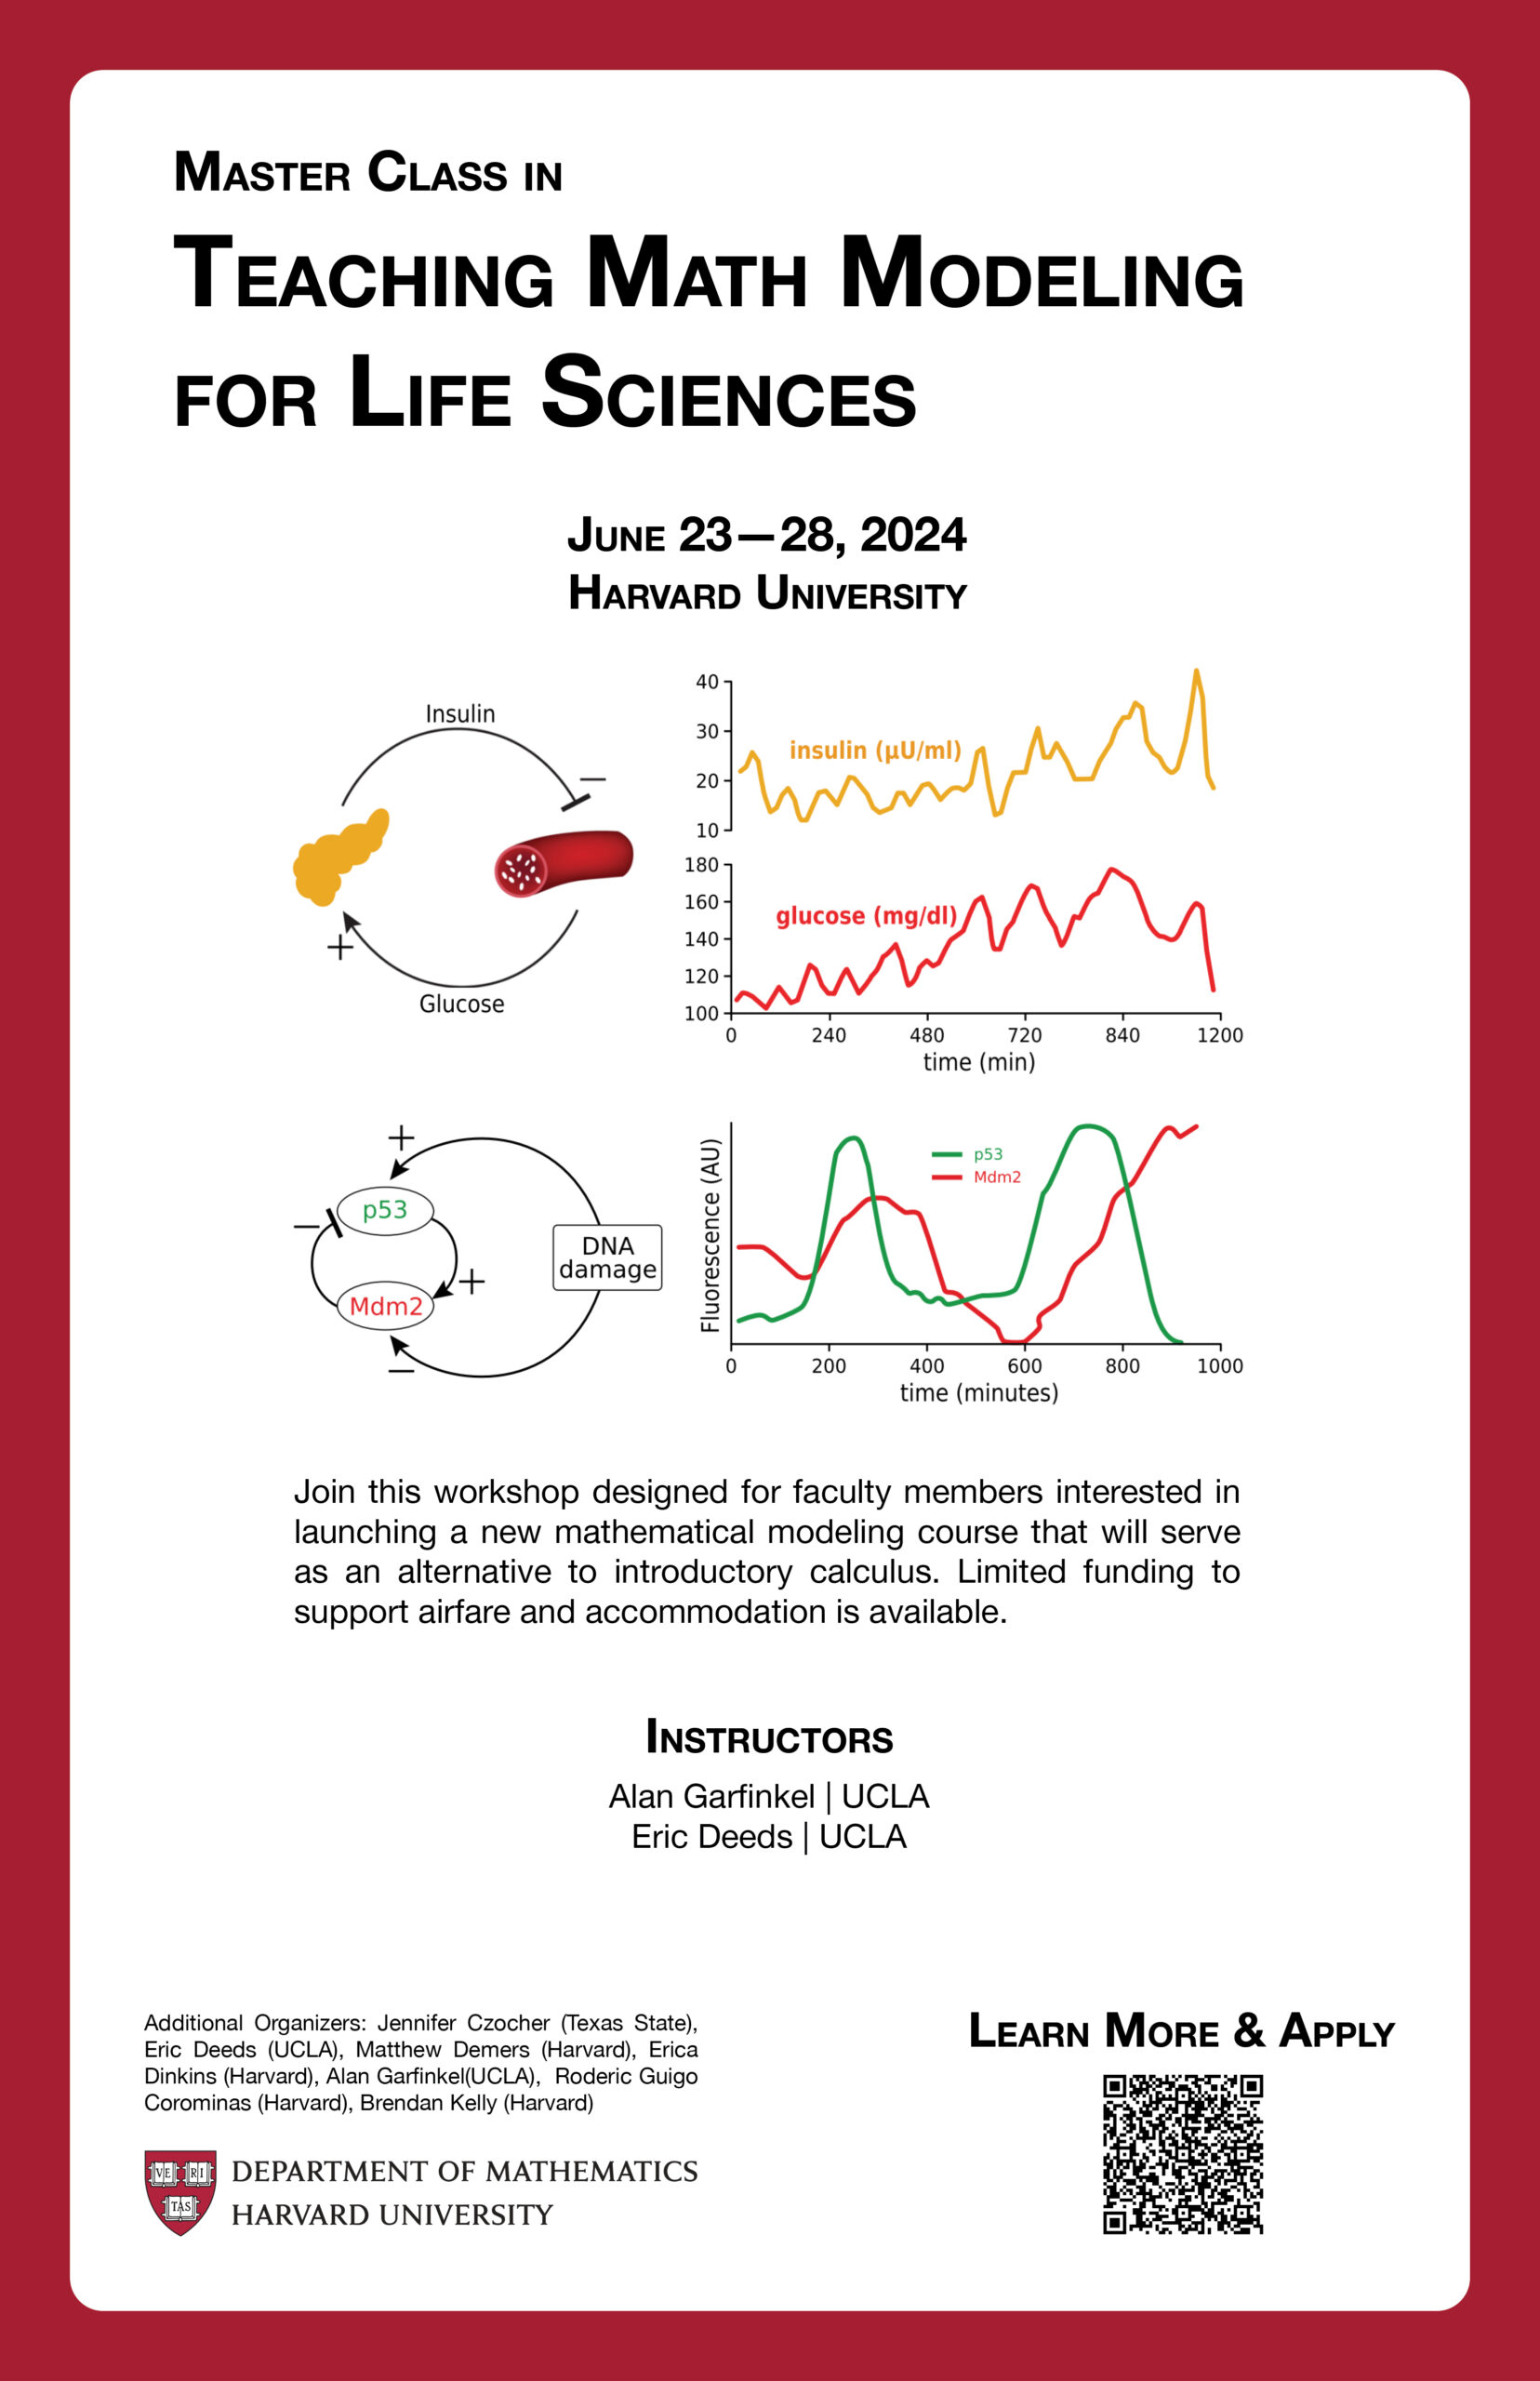 A poster with details about a summer workshop held at Harvard about how to teach math modeling for life sciences.